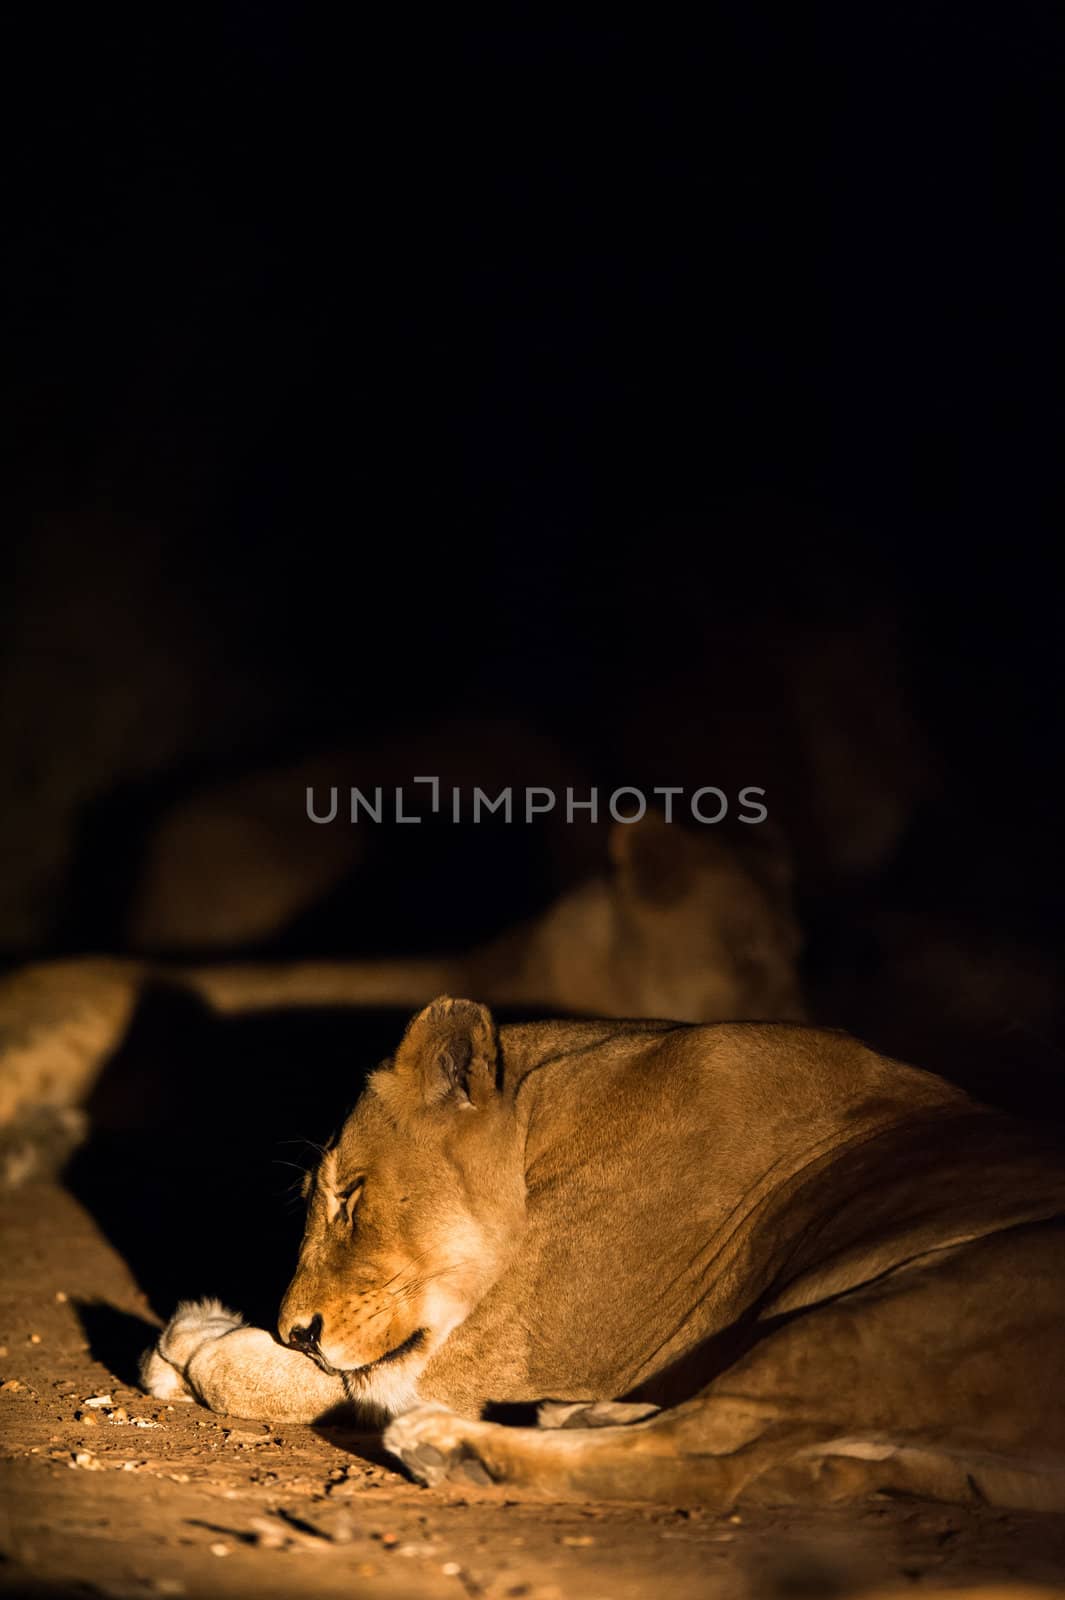 Lions at night by edan